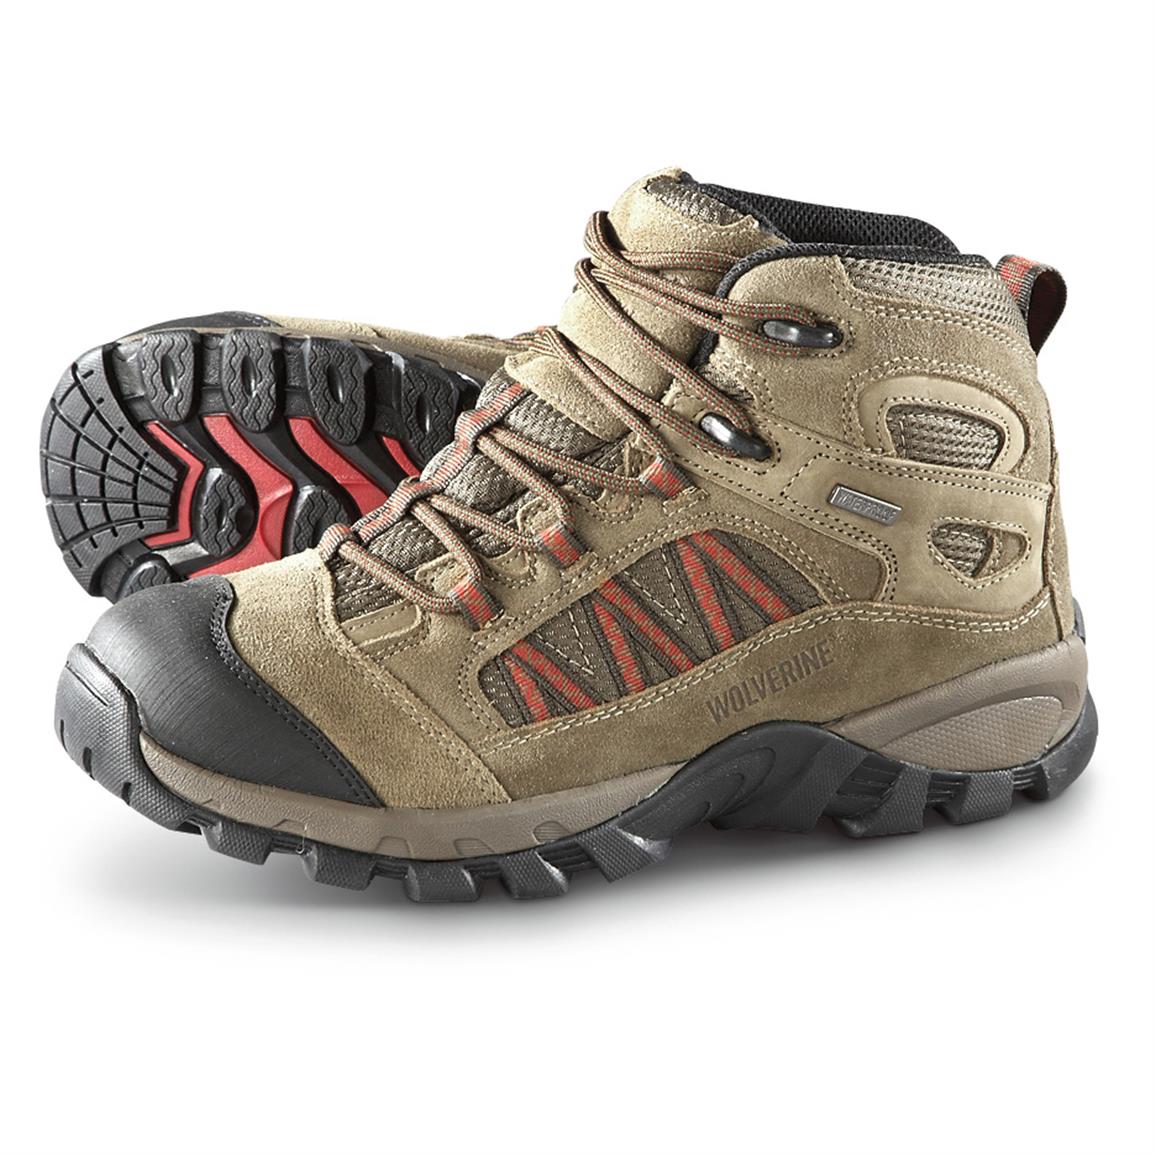 Men&#39;s Wolverine Blackledge Hiking Boots, Brindle - 610426, Hiking Boots & Shoes at Sportsman&#39;s Guide